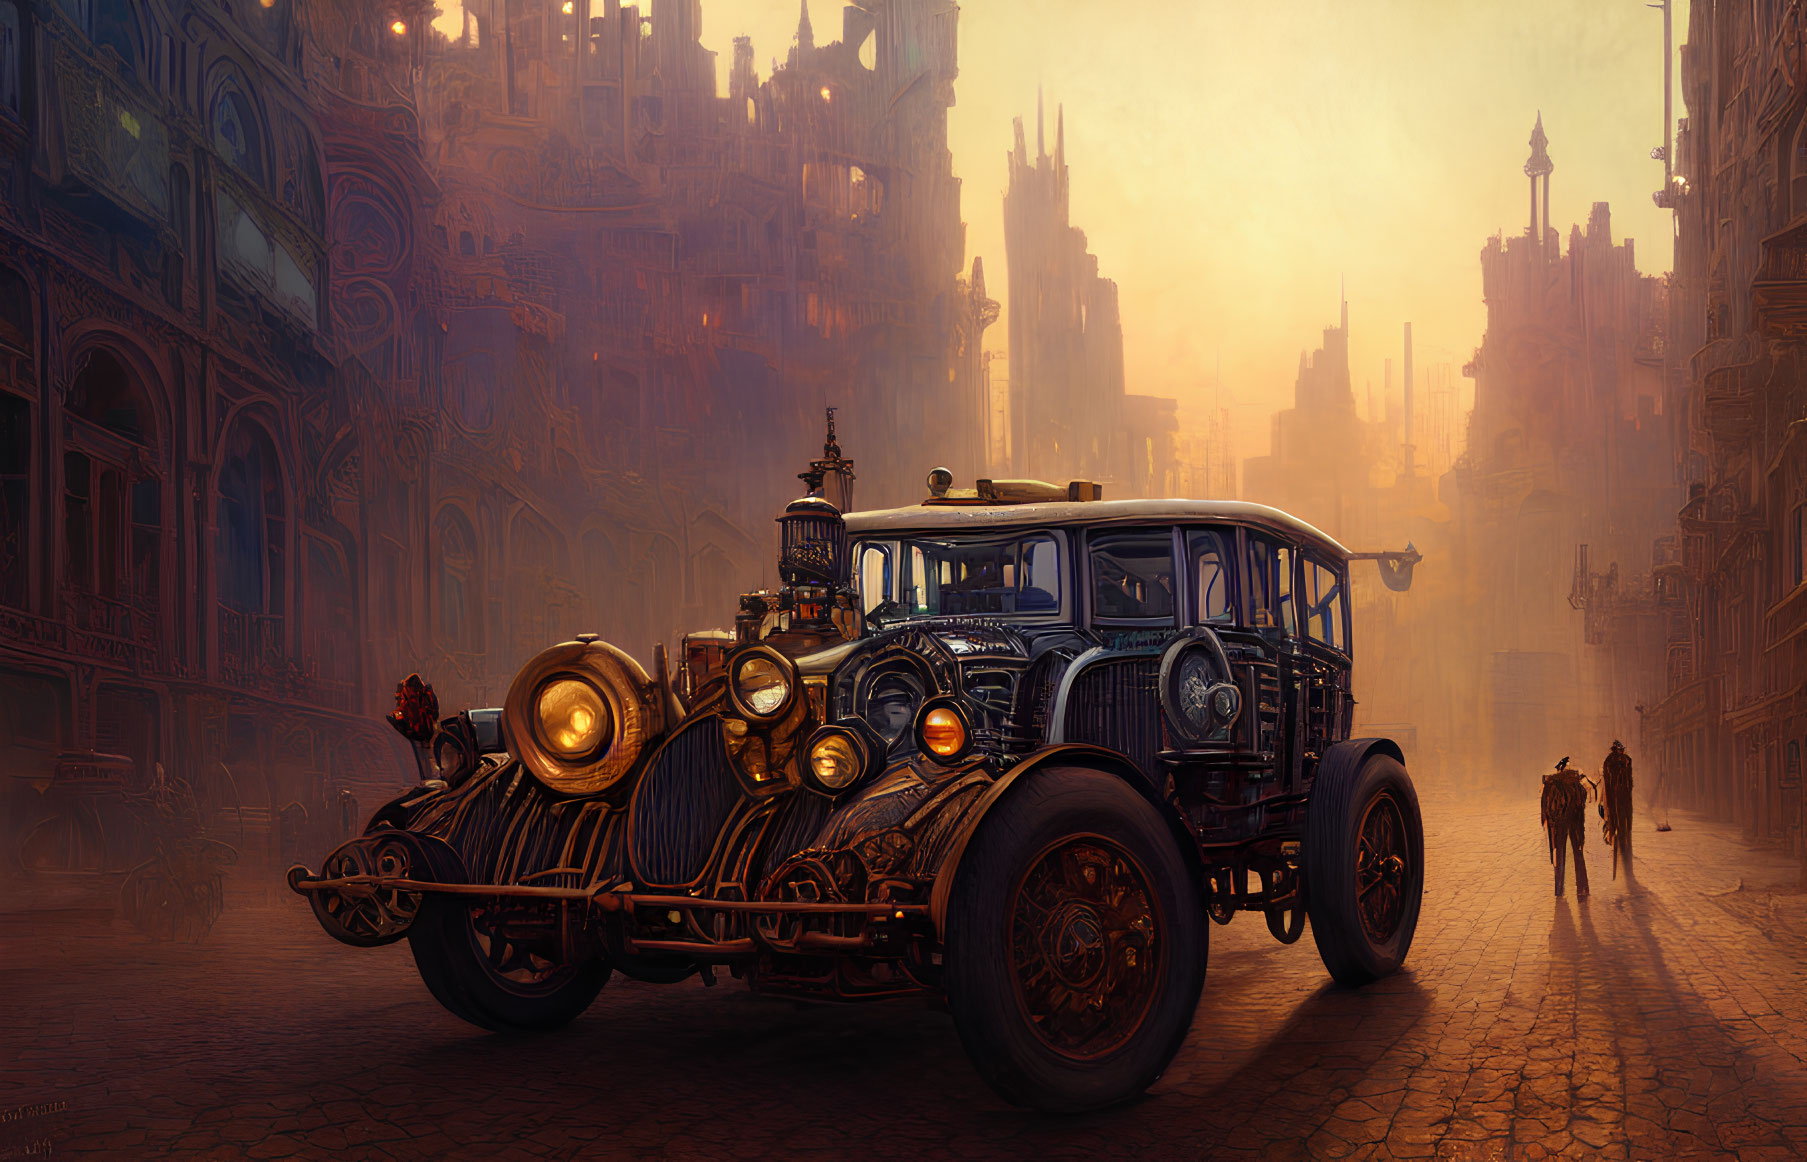 Vintage Car on Cobblestone Street in Fantastical City with Gothic Architecture